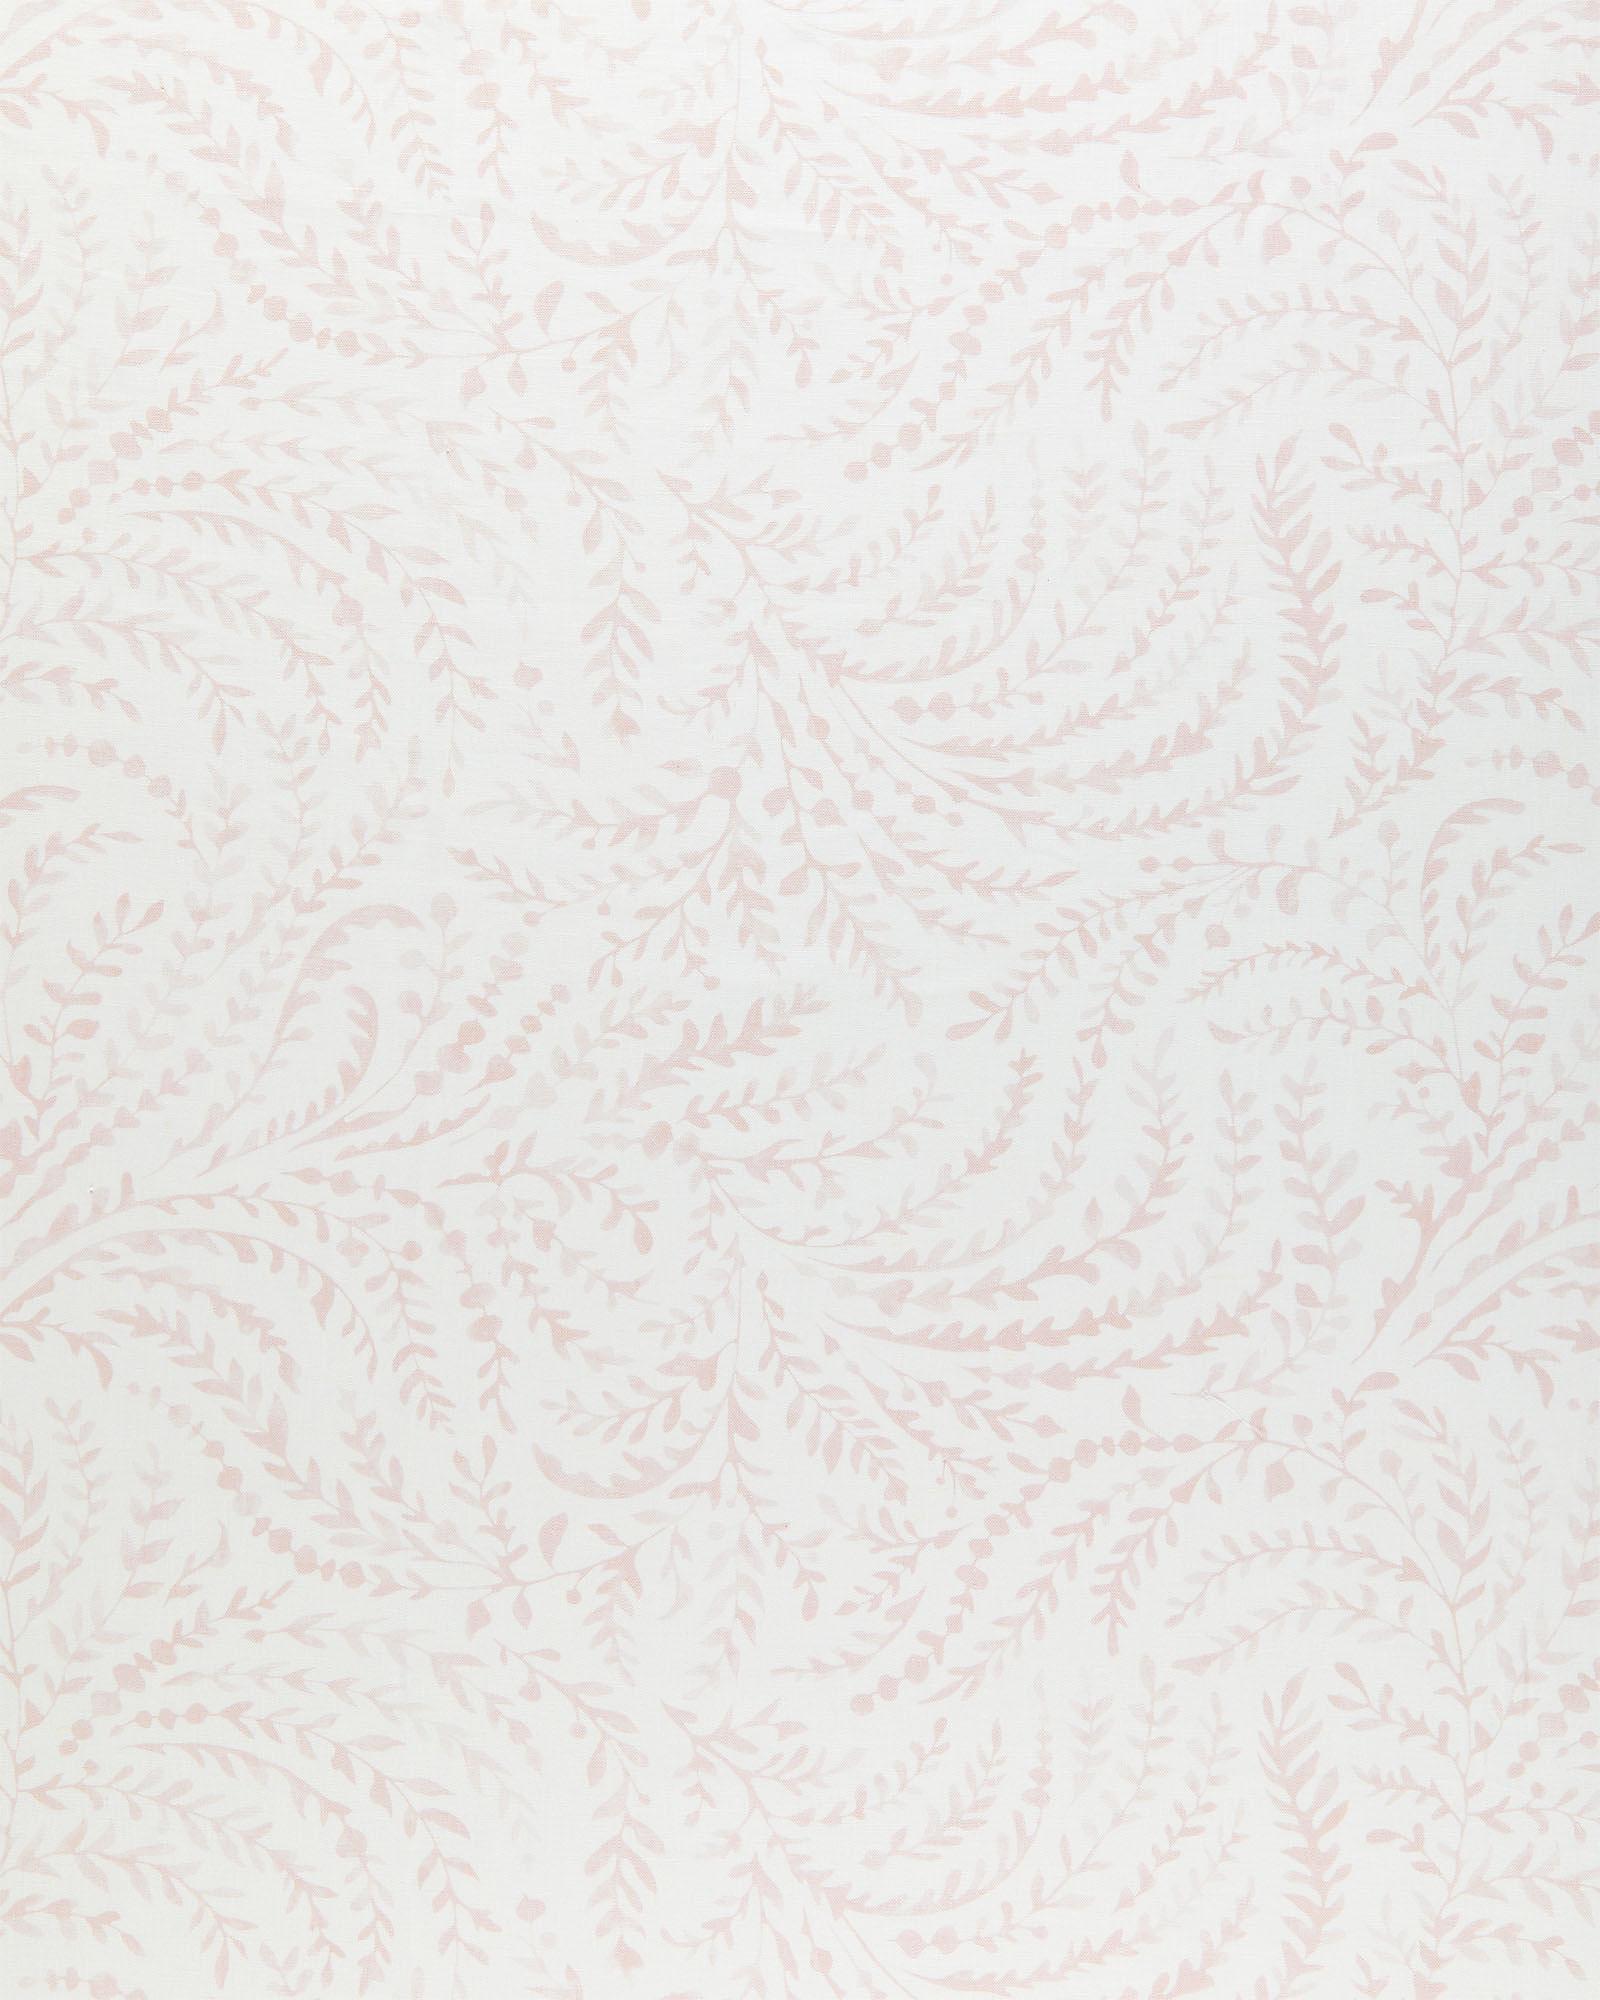 Priano Linen - Pink Sand | Serena and Lily